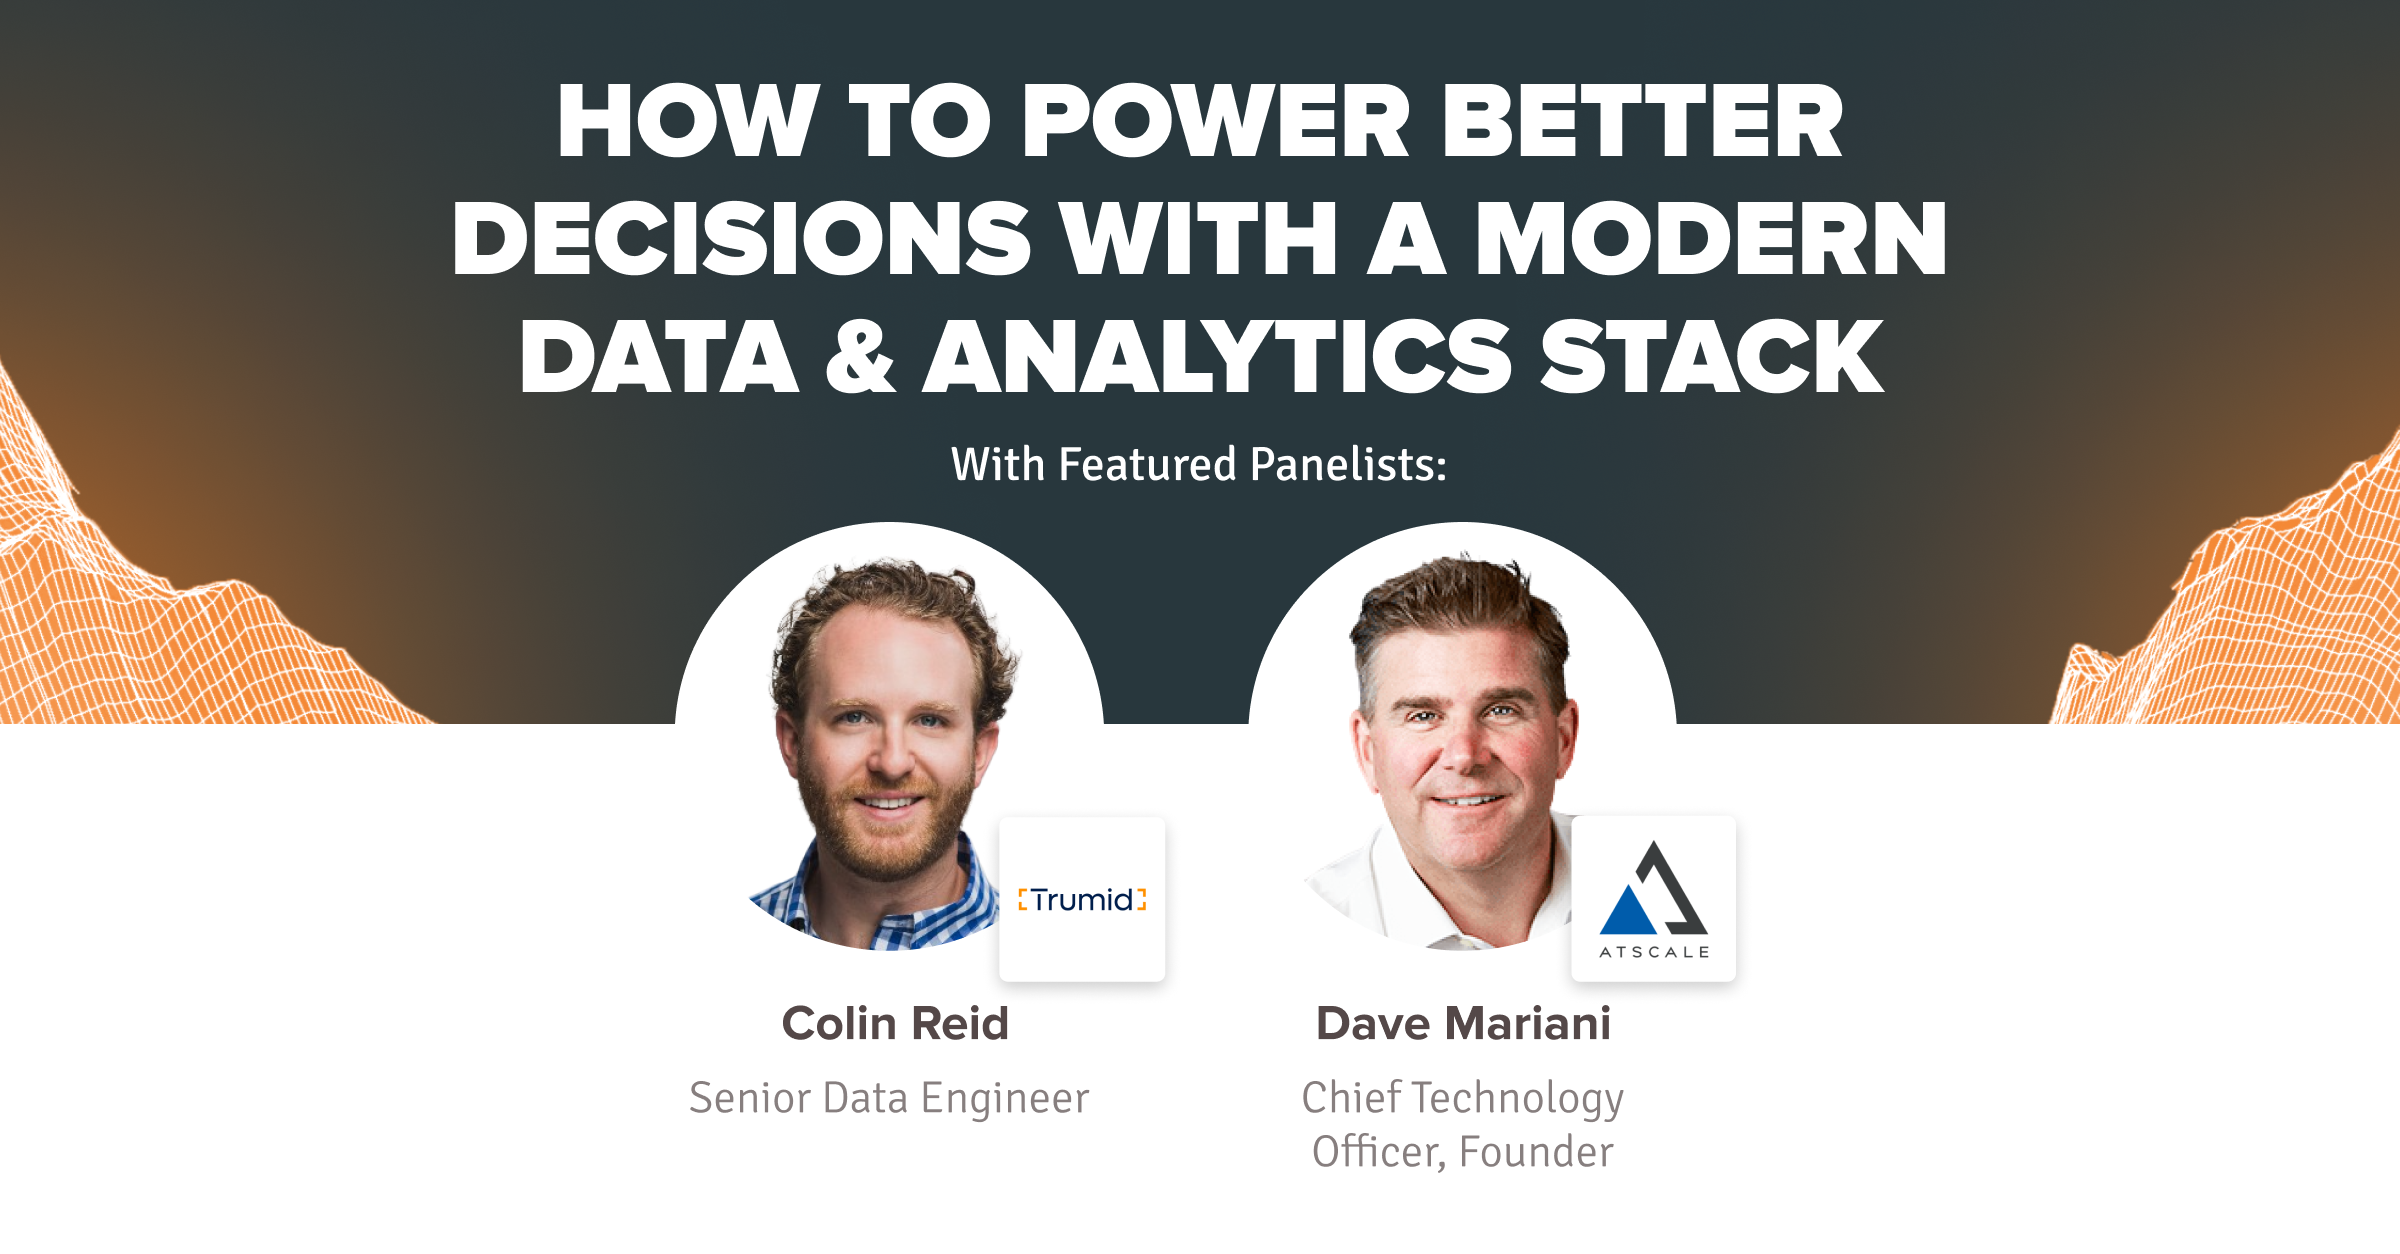 How to Power Better Decisions with a Modern Data & Analytics Stack